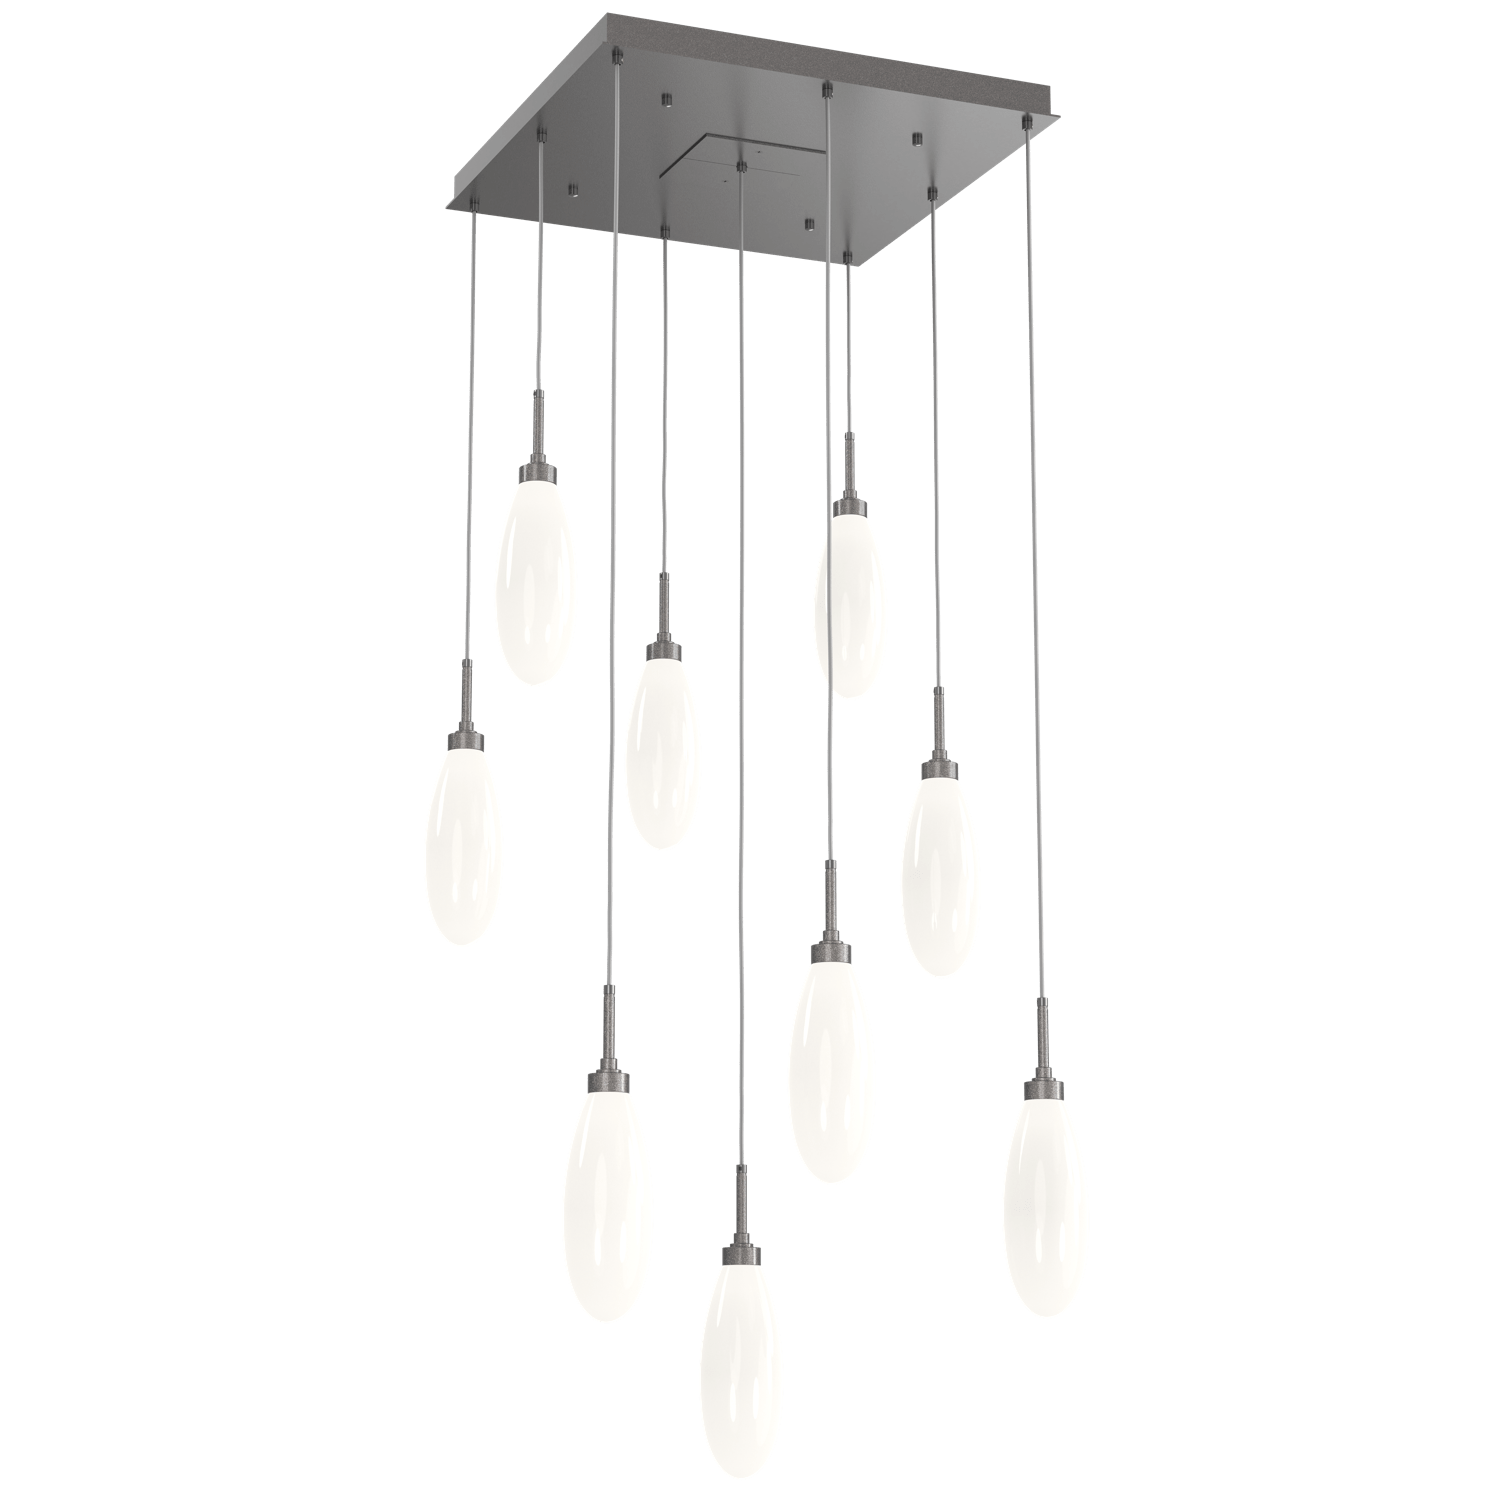 CHB0071-09-GP-WL-LL-Hammerton-Studio-Fiori-9-light-square-pendant-chandelier-with-graphite-finish-and-opal-white-glass-shades-and-LED-lamping